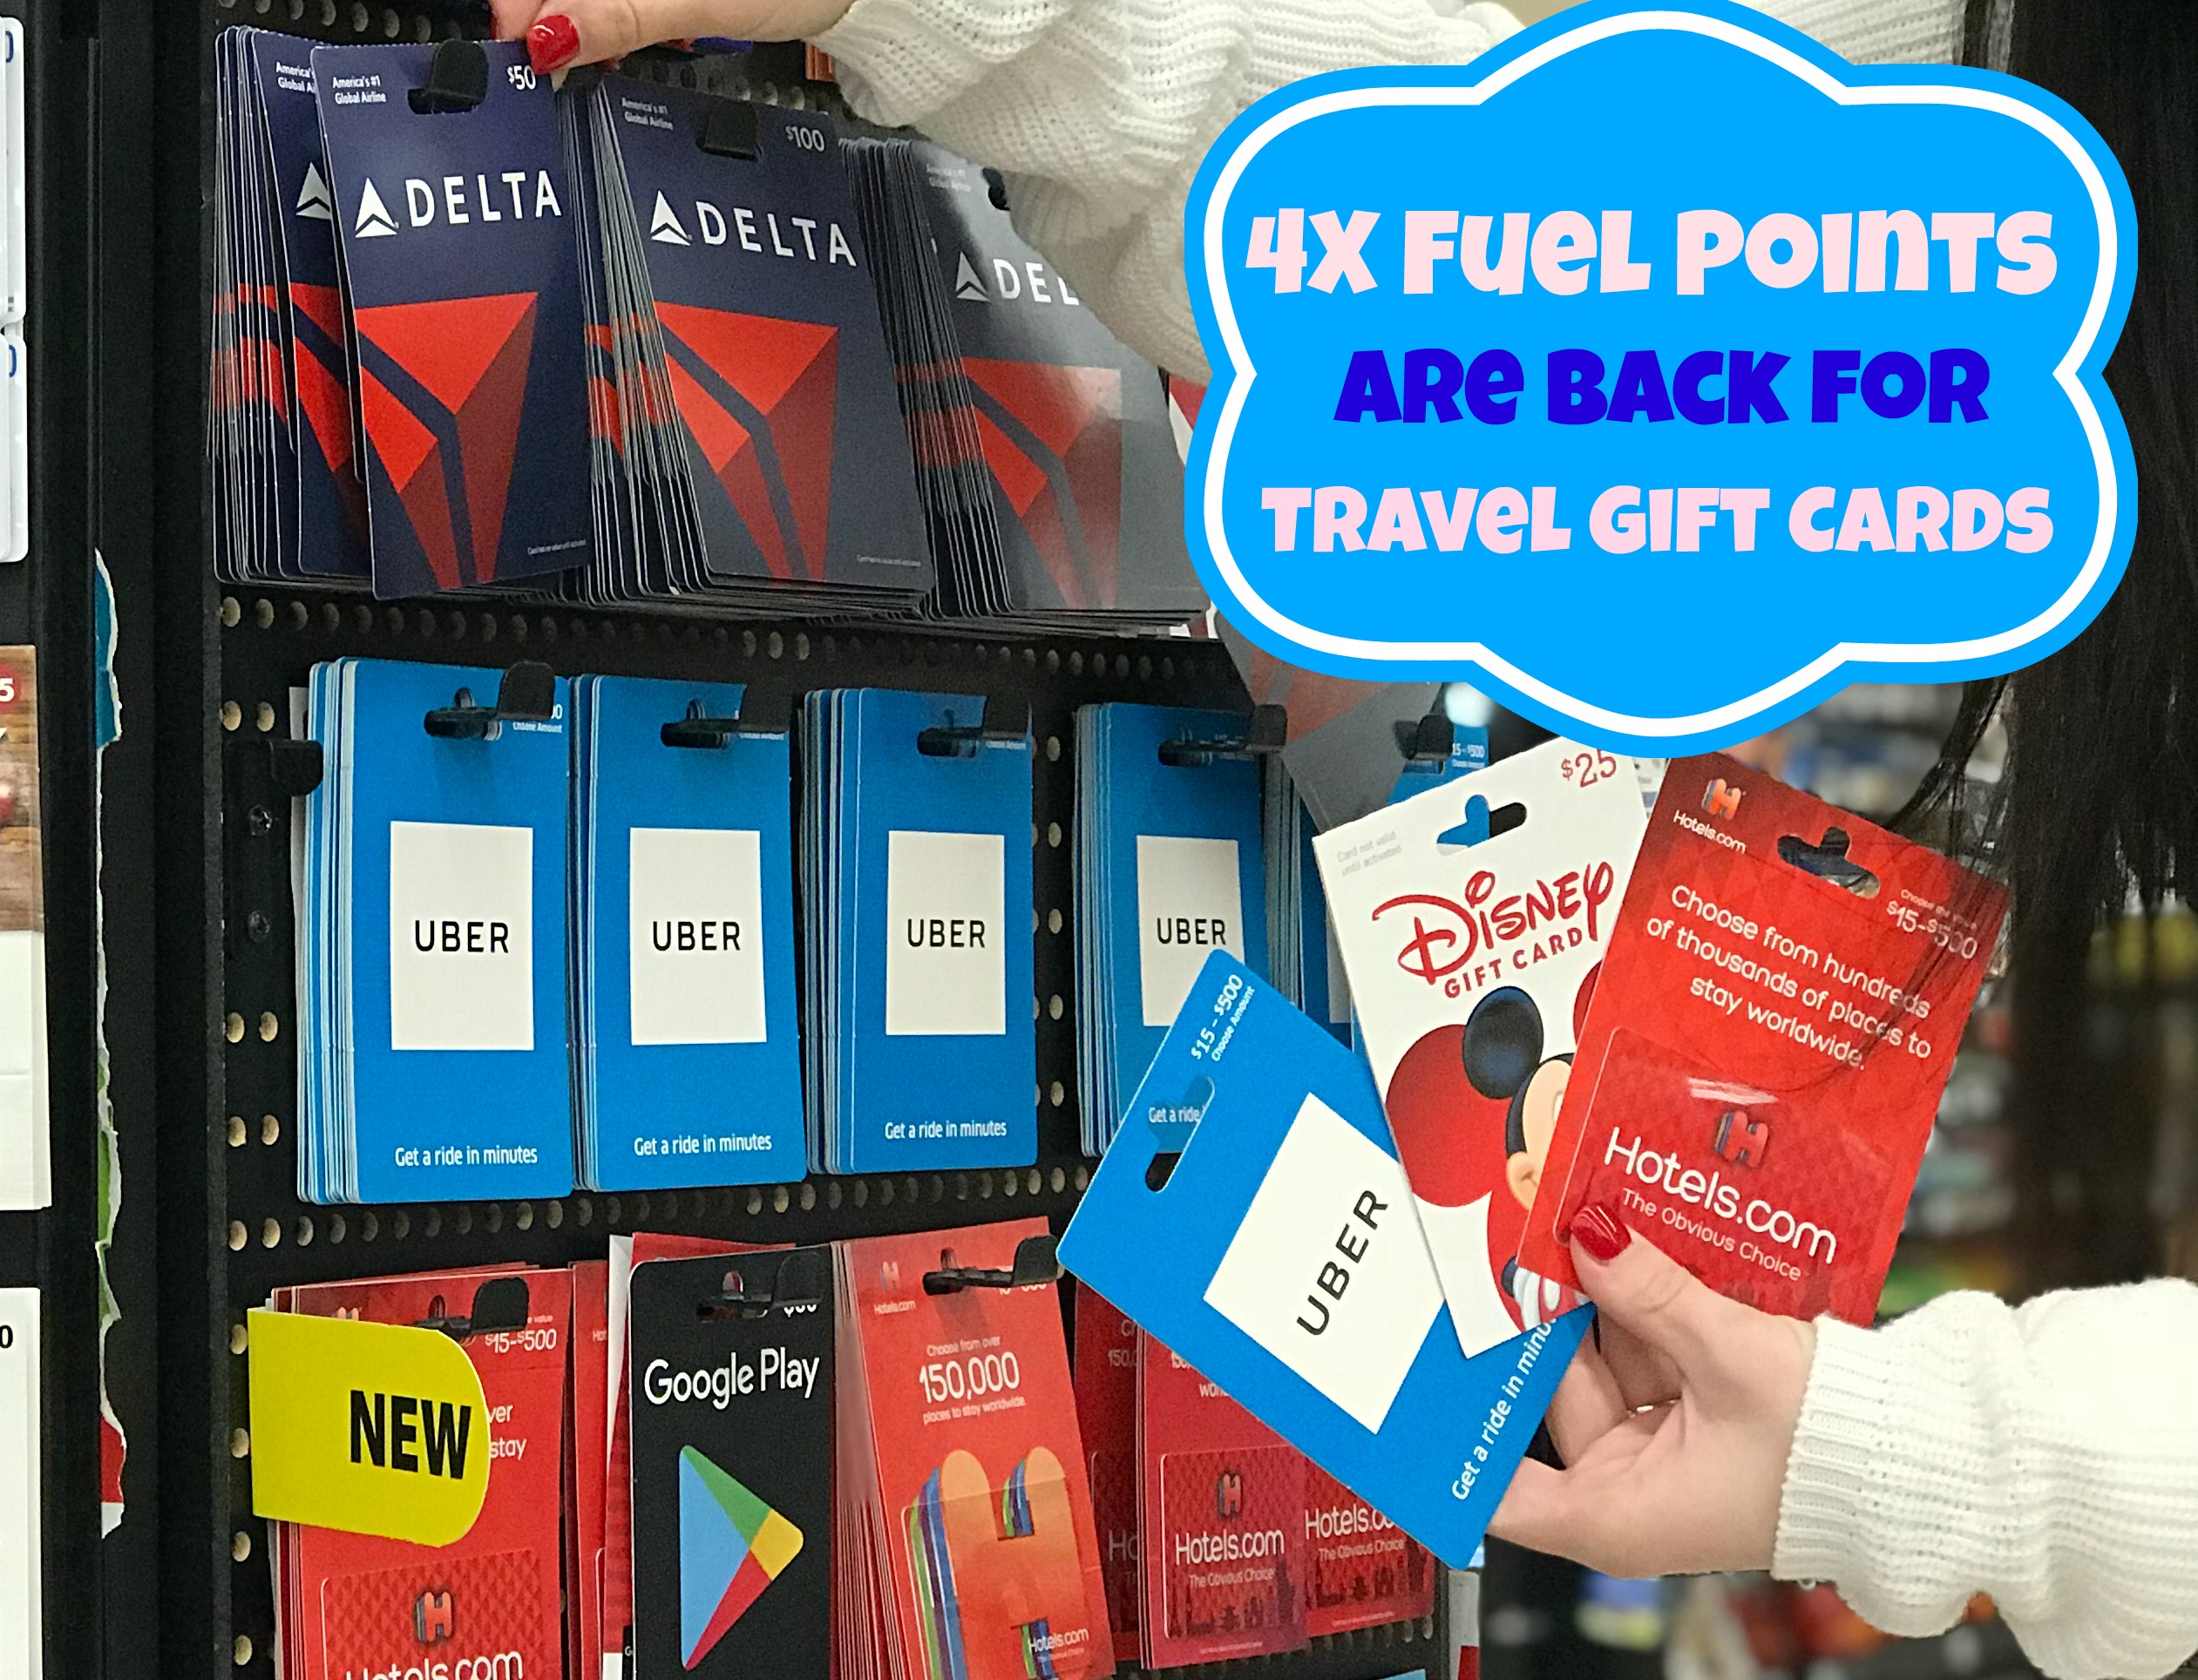 From June 27th July 17th You Can Earn 4x Fuel Points On Travel Gift Cards At Kroger Ll Need To The For Be Added When